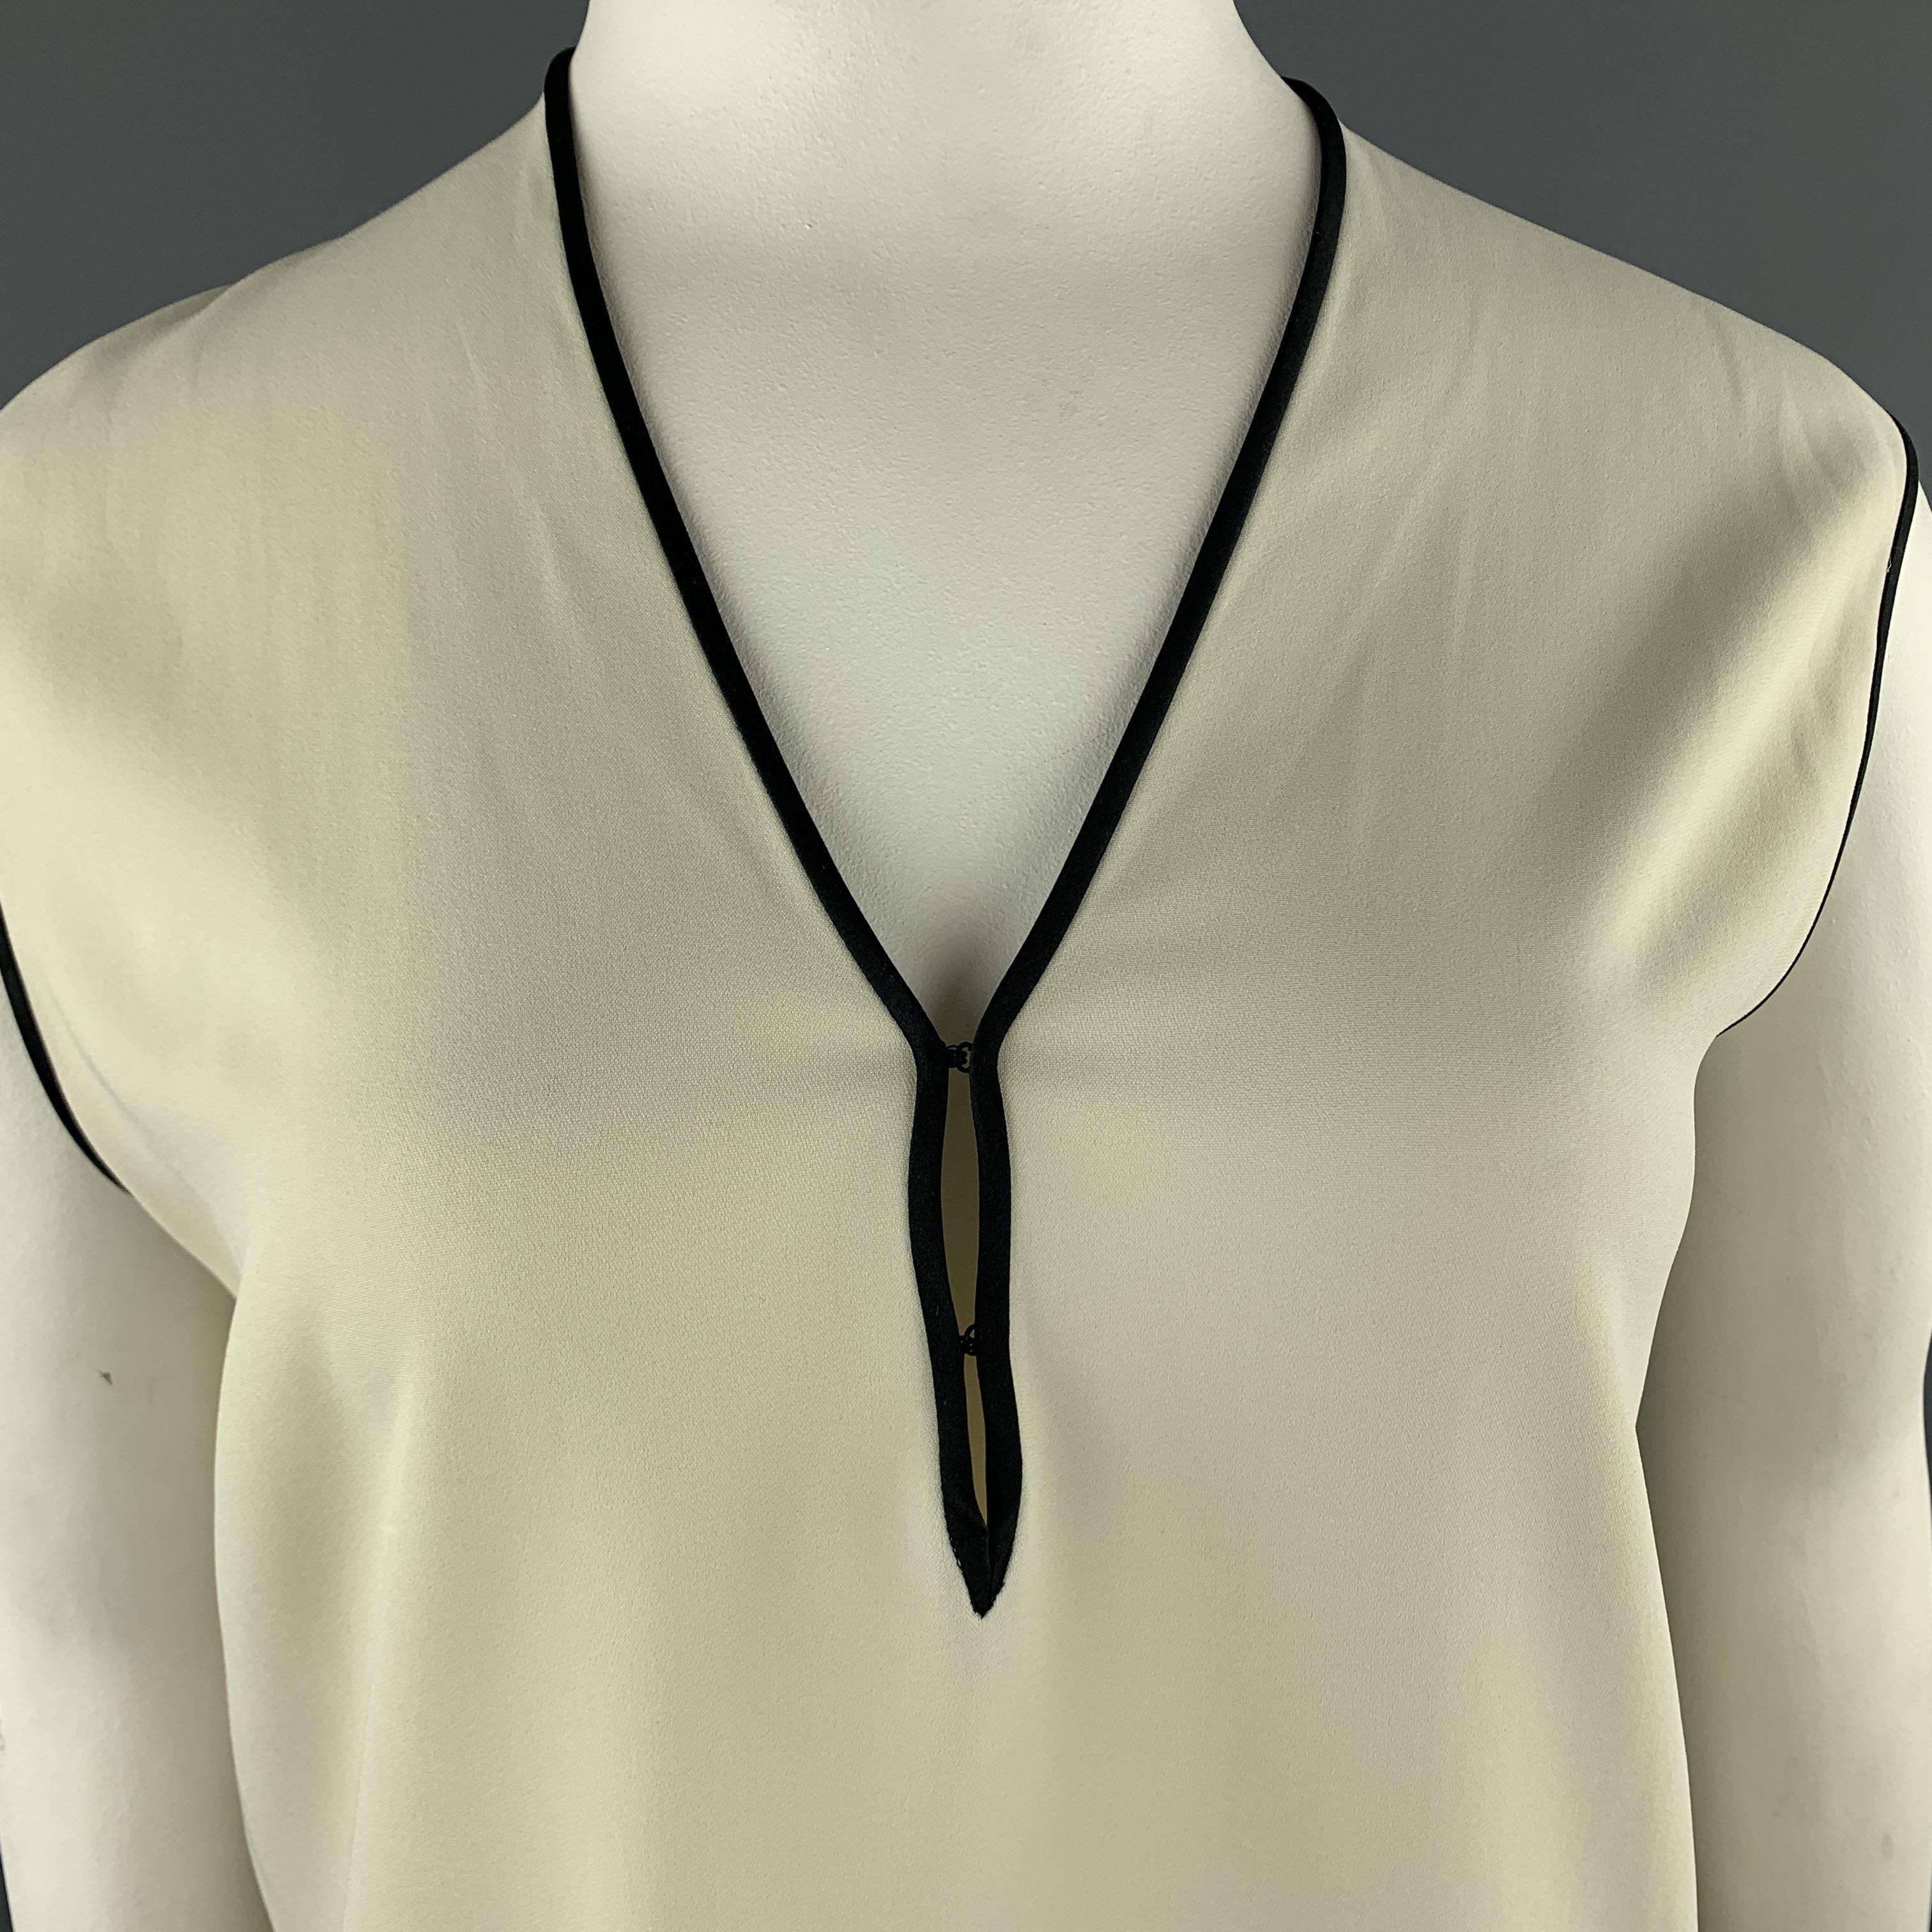 ETRO sleeveless blouse comes in creme crepe with black piping and a V neck hook eye closure neck line. Made in Italy.

Very Good Pre-Owned Condition.
Marked:

Measurements:

Shoulder: 18 in.
Bust: 40 in.
Length: 27 in.